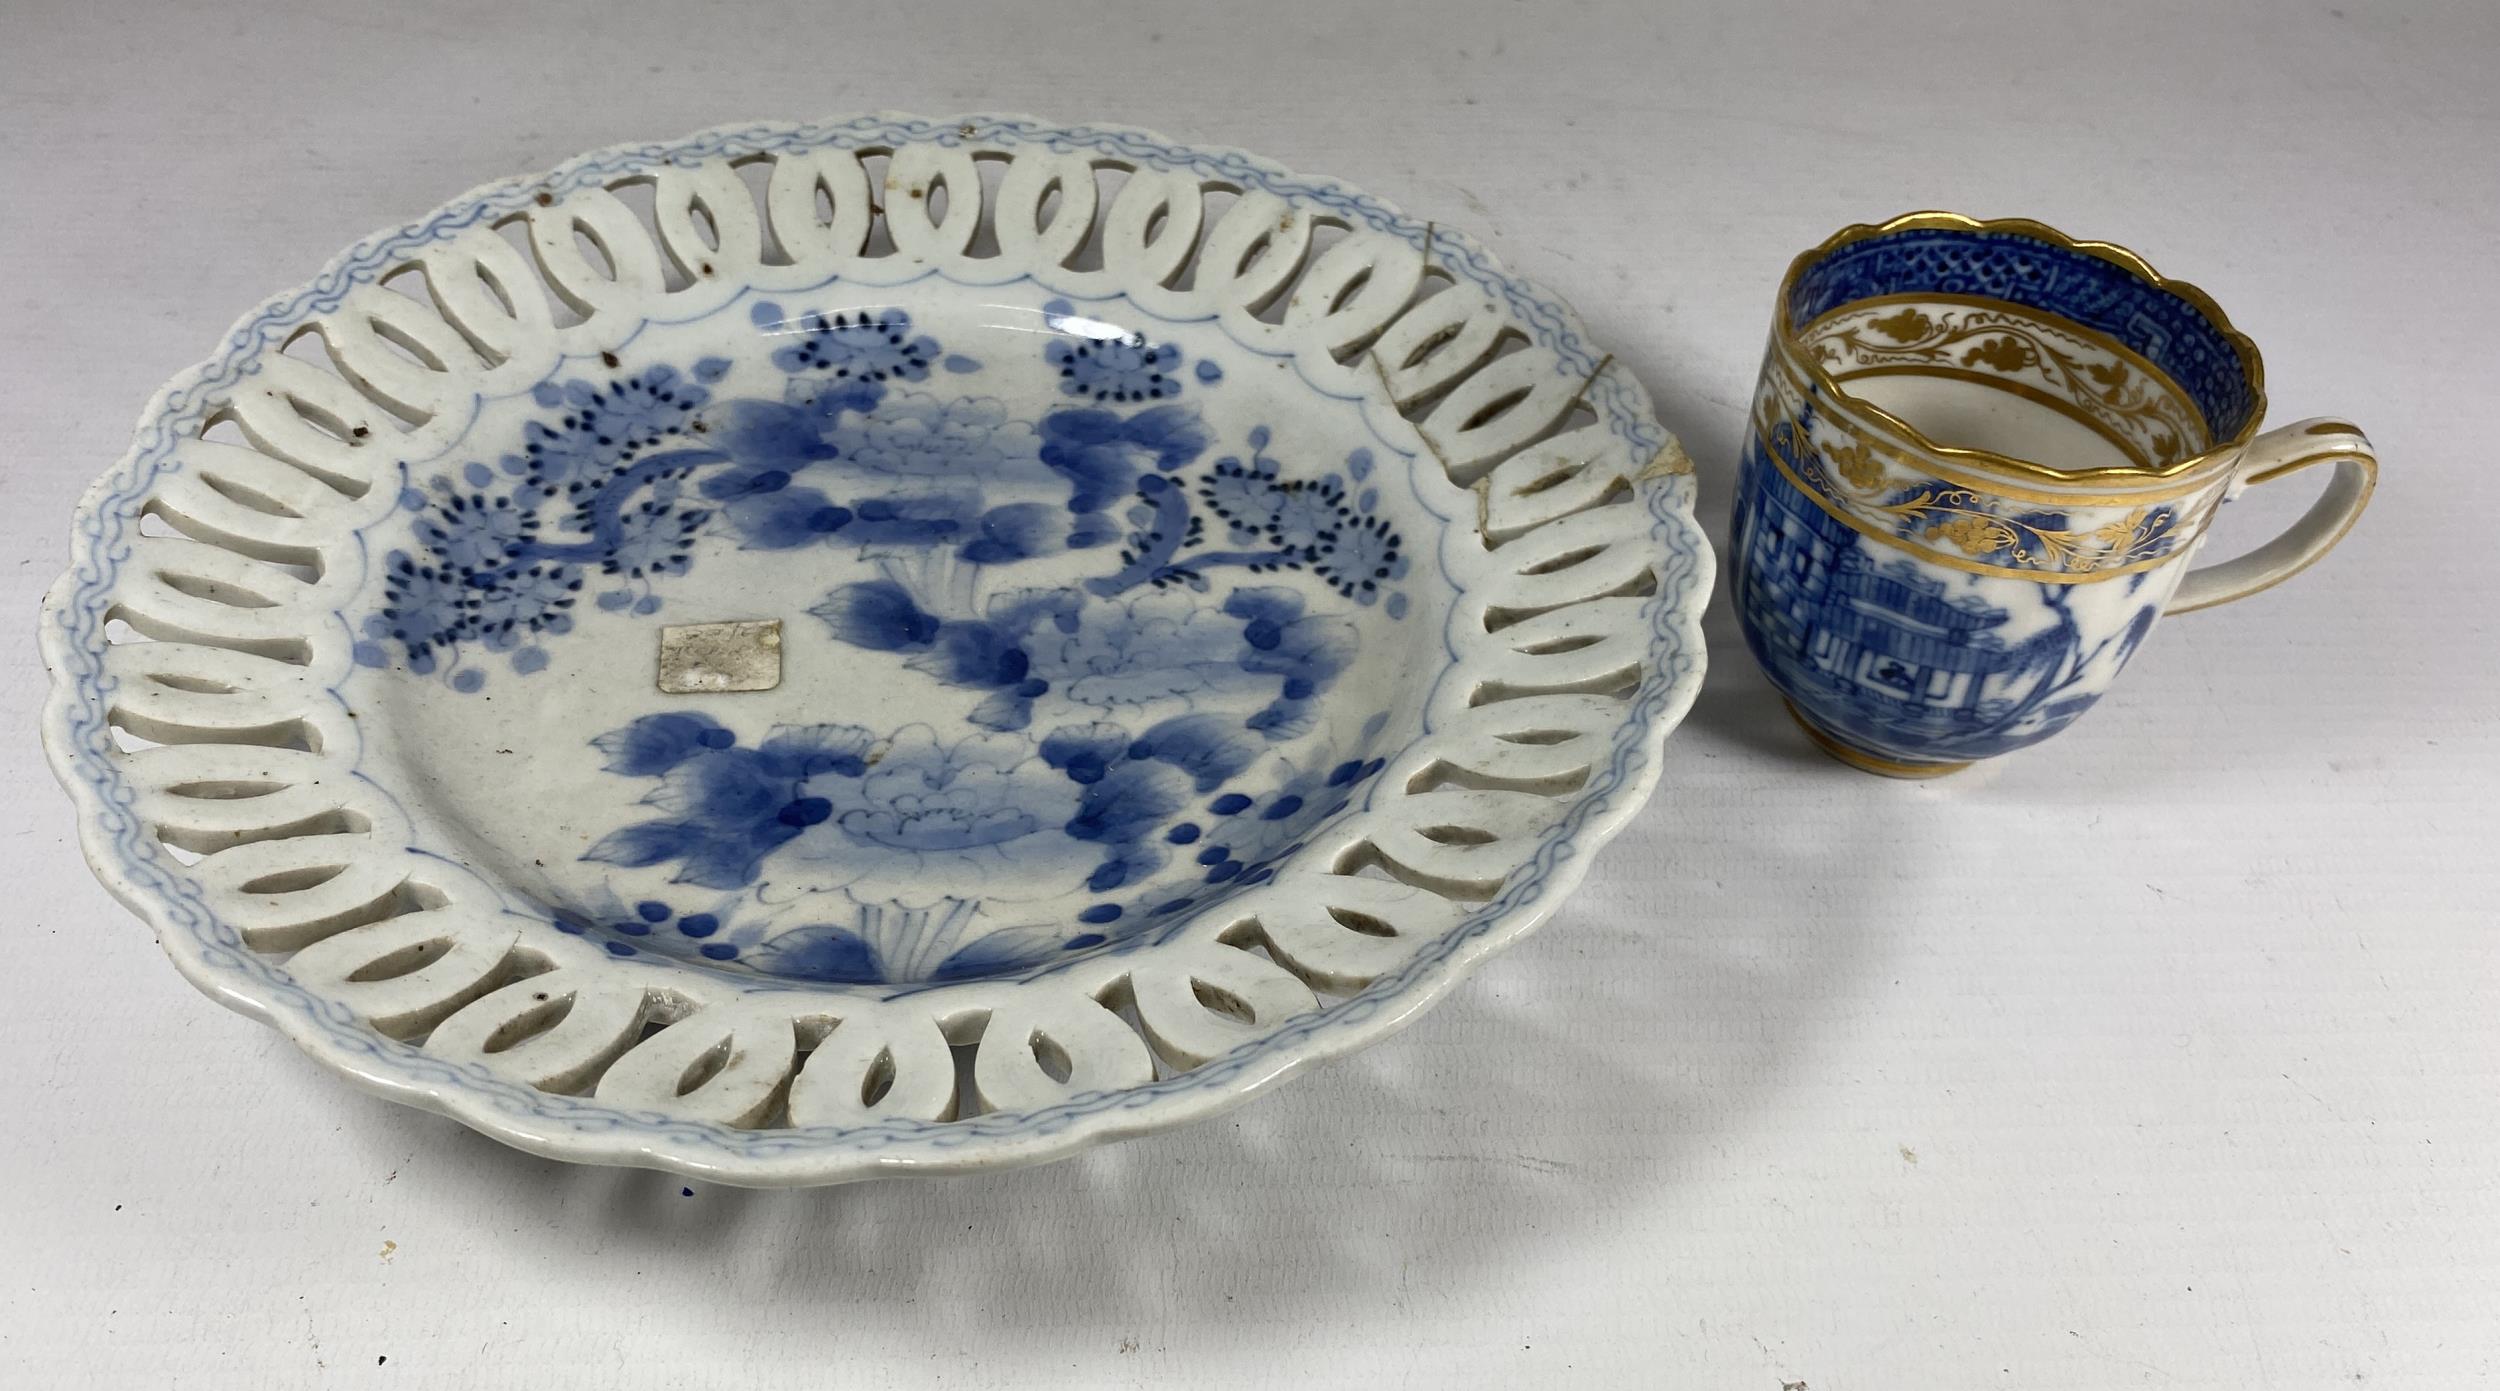 A 19TH CENTURY JAPANESE BLUE AND WHITE PIERCED RIM PLATE TOGETHER WITH A CHINESE 19TH CENTURY EXPORT